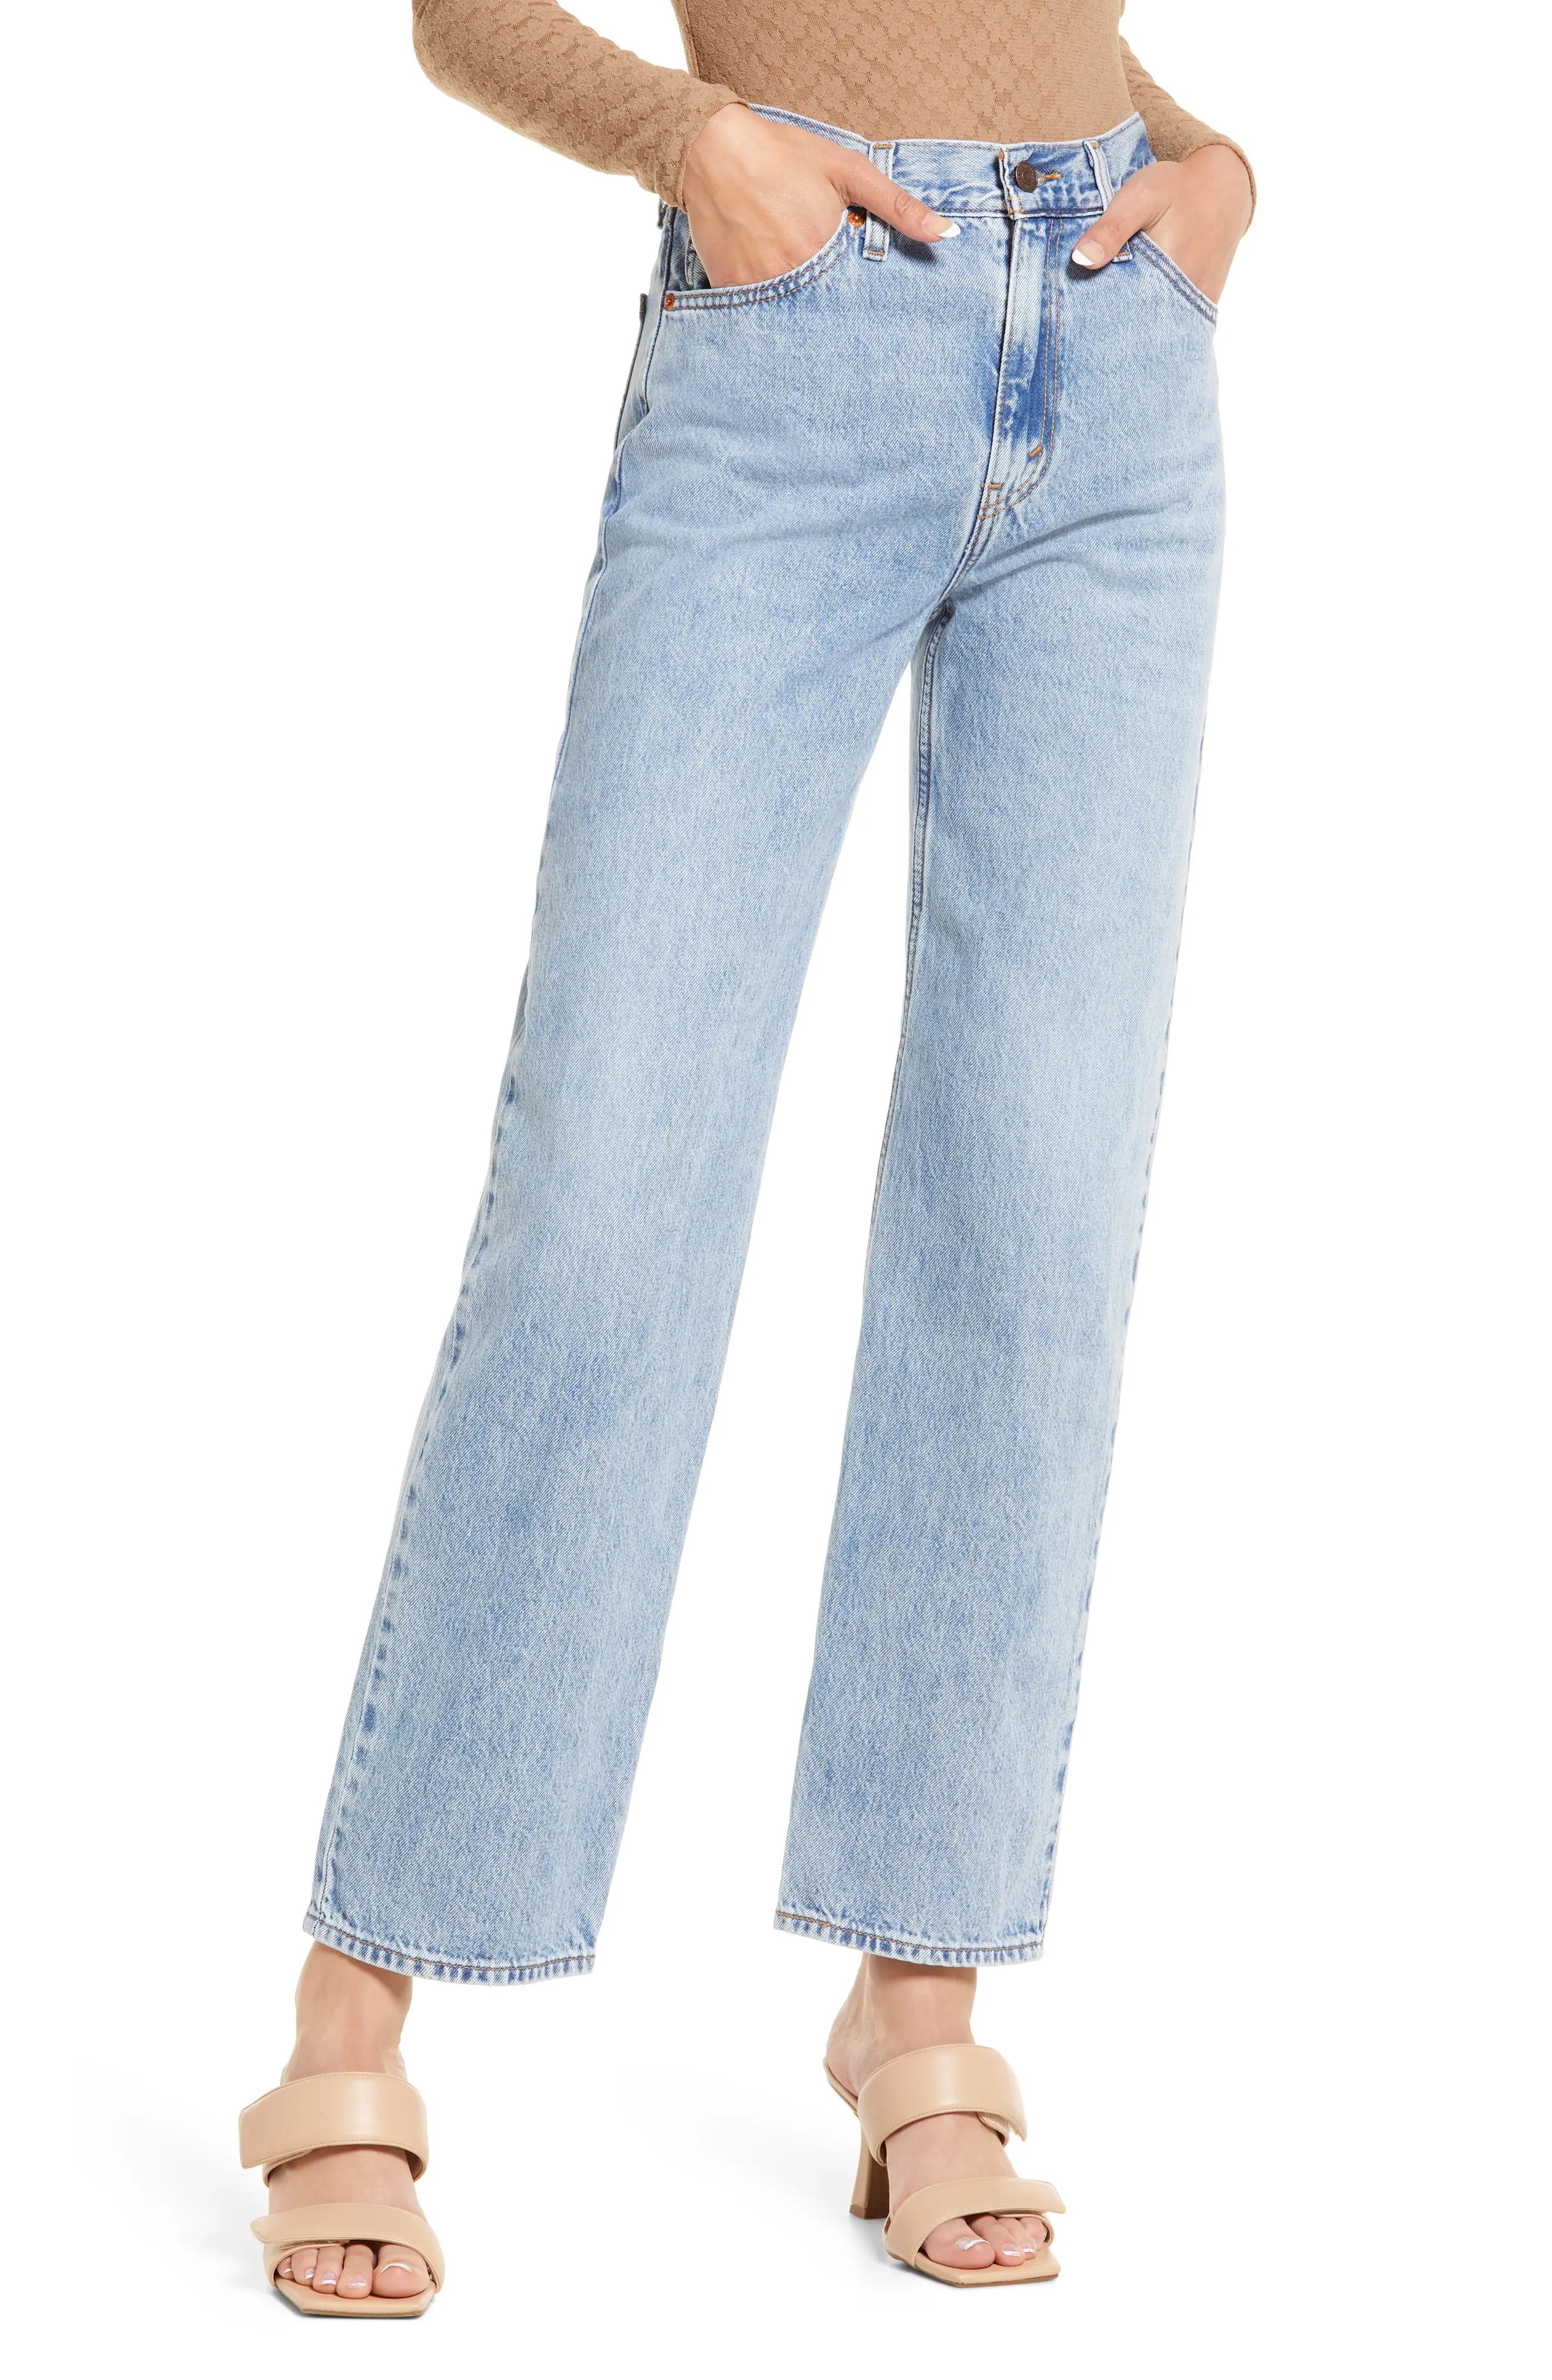 levi's Women's High Waist Dad Jeans in Charlie Boy at Nordstrom, Size 33 X 30 | Nordstrom